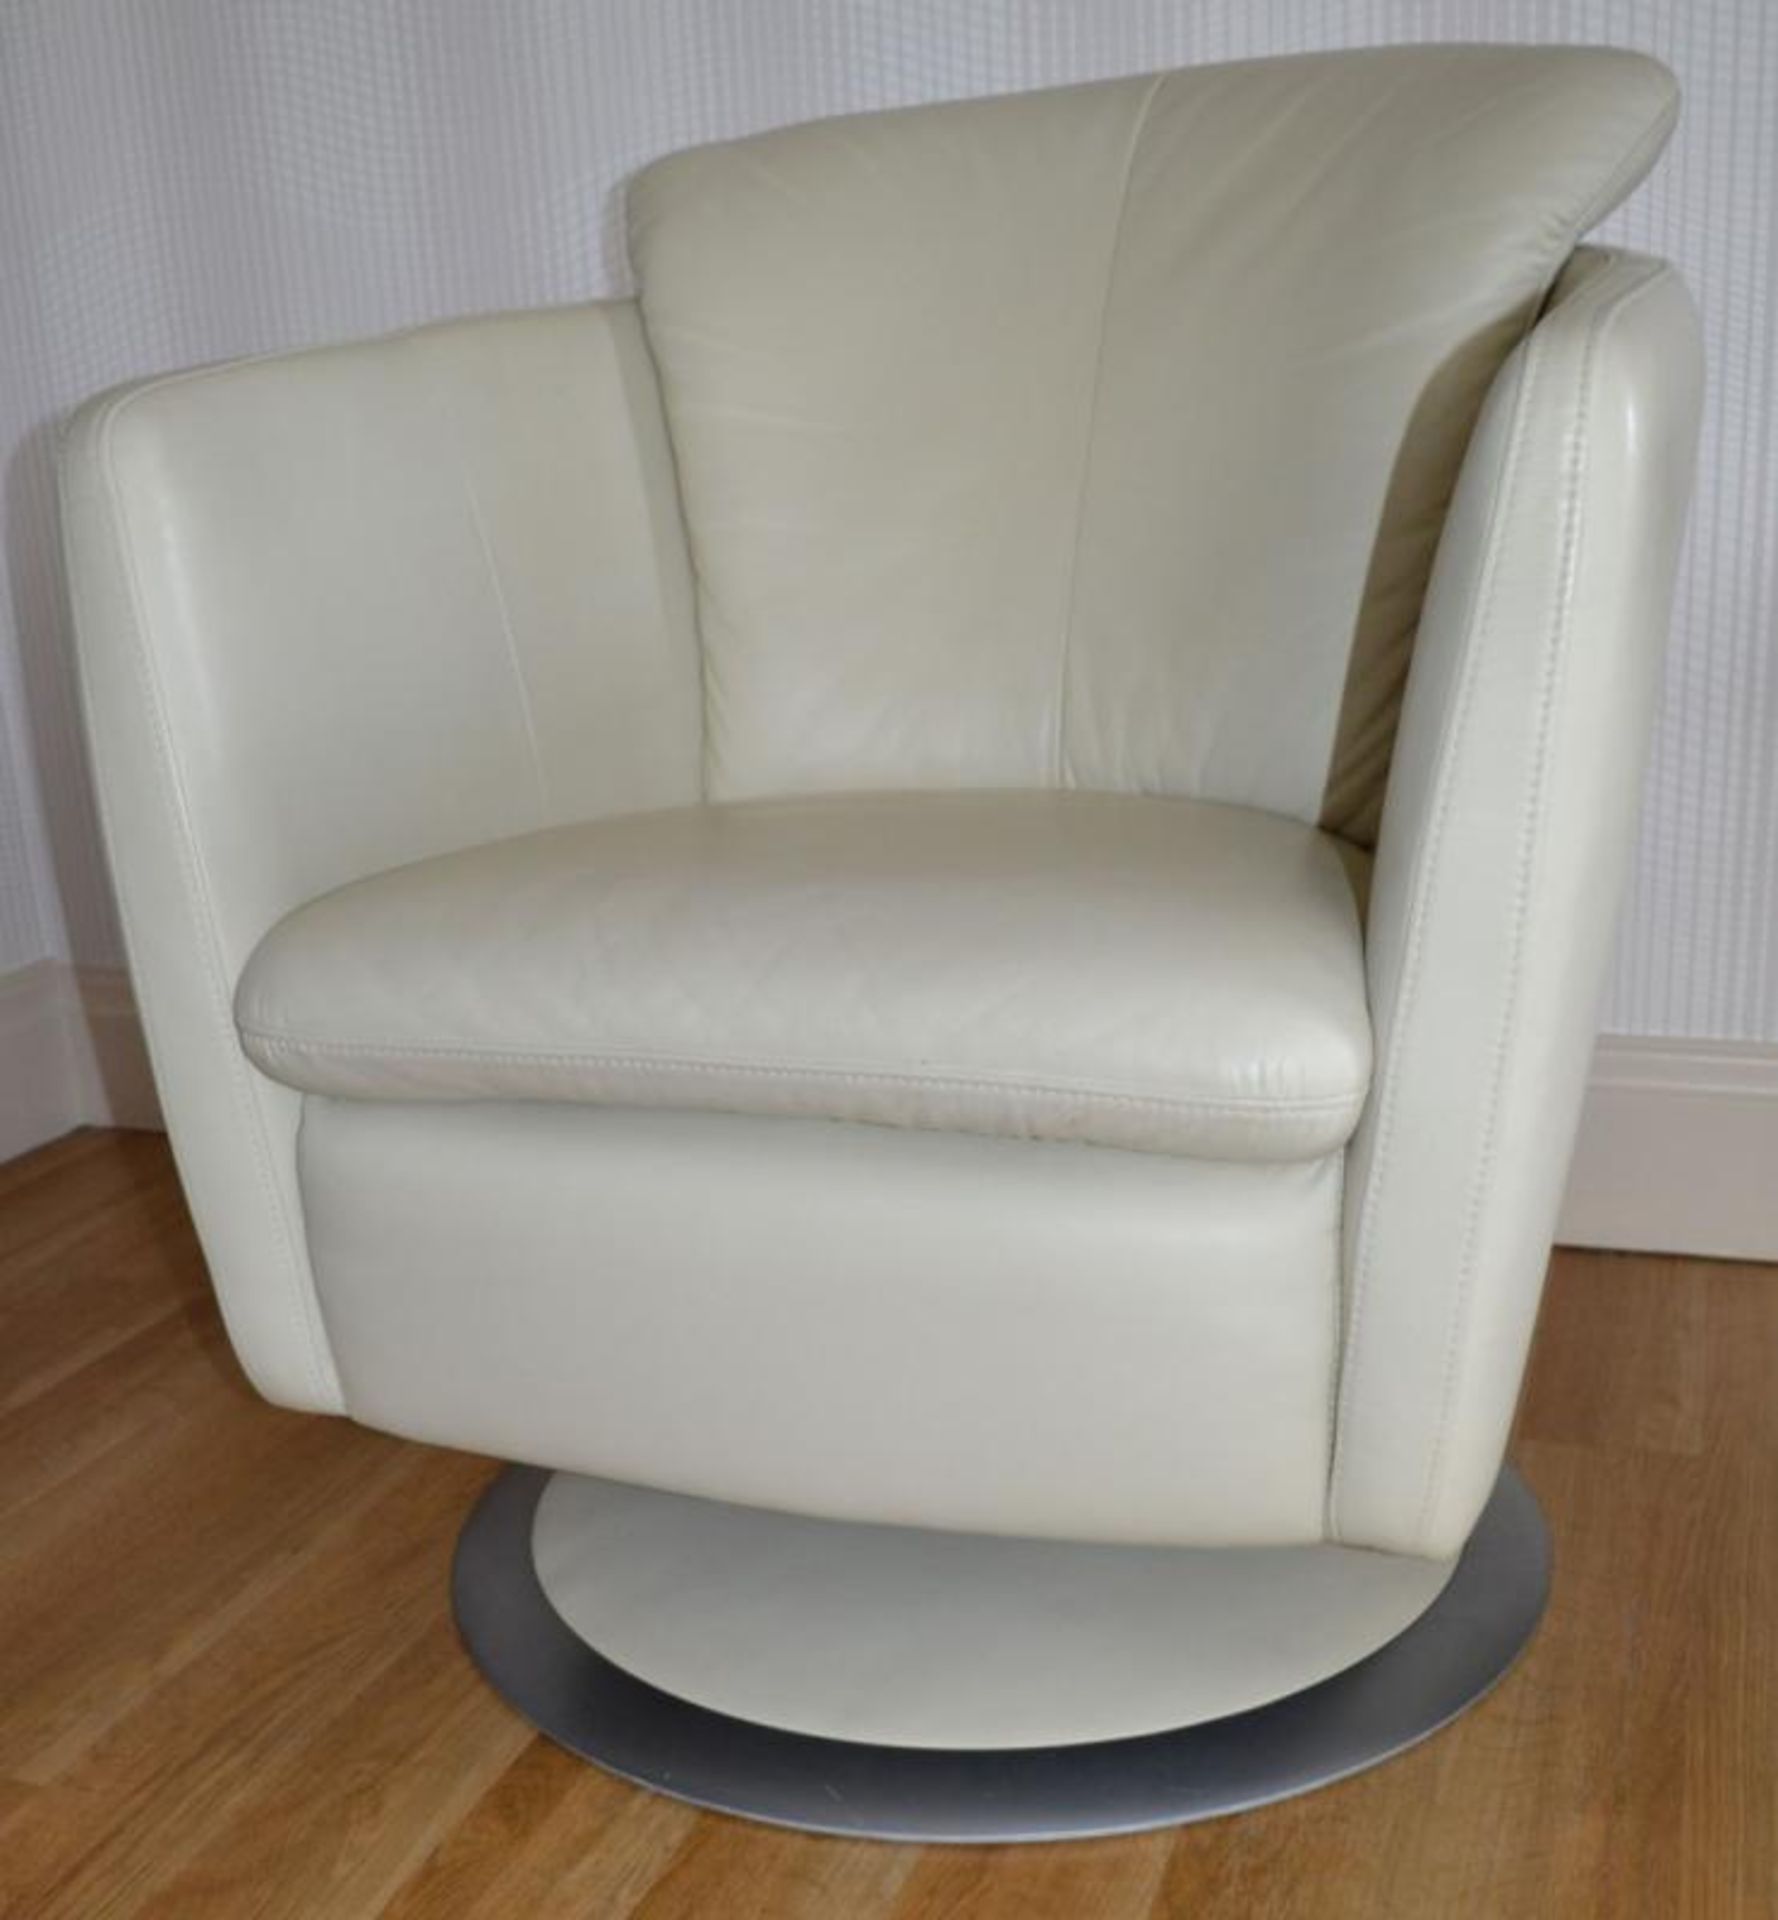 2 x Cream Leather Swivel Chairs - Excellent Condition - CL272 - Location: Burnley BB12 *NO VAT On Ha - Image 8 of 8